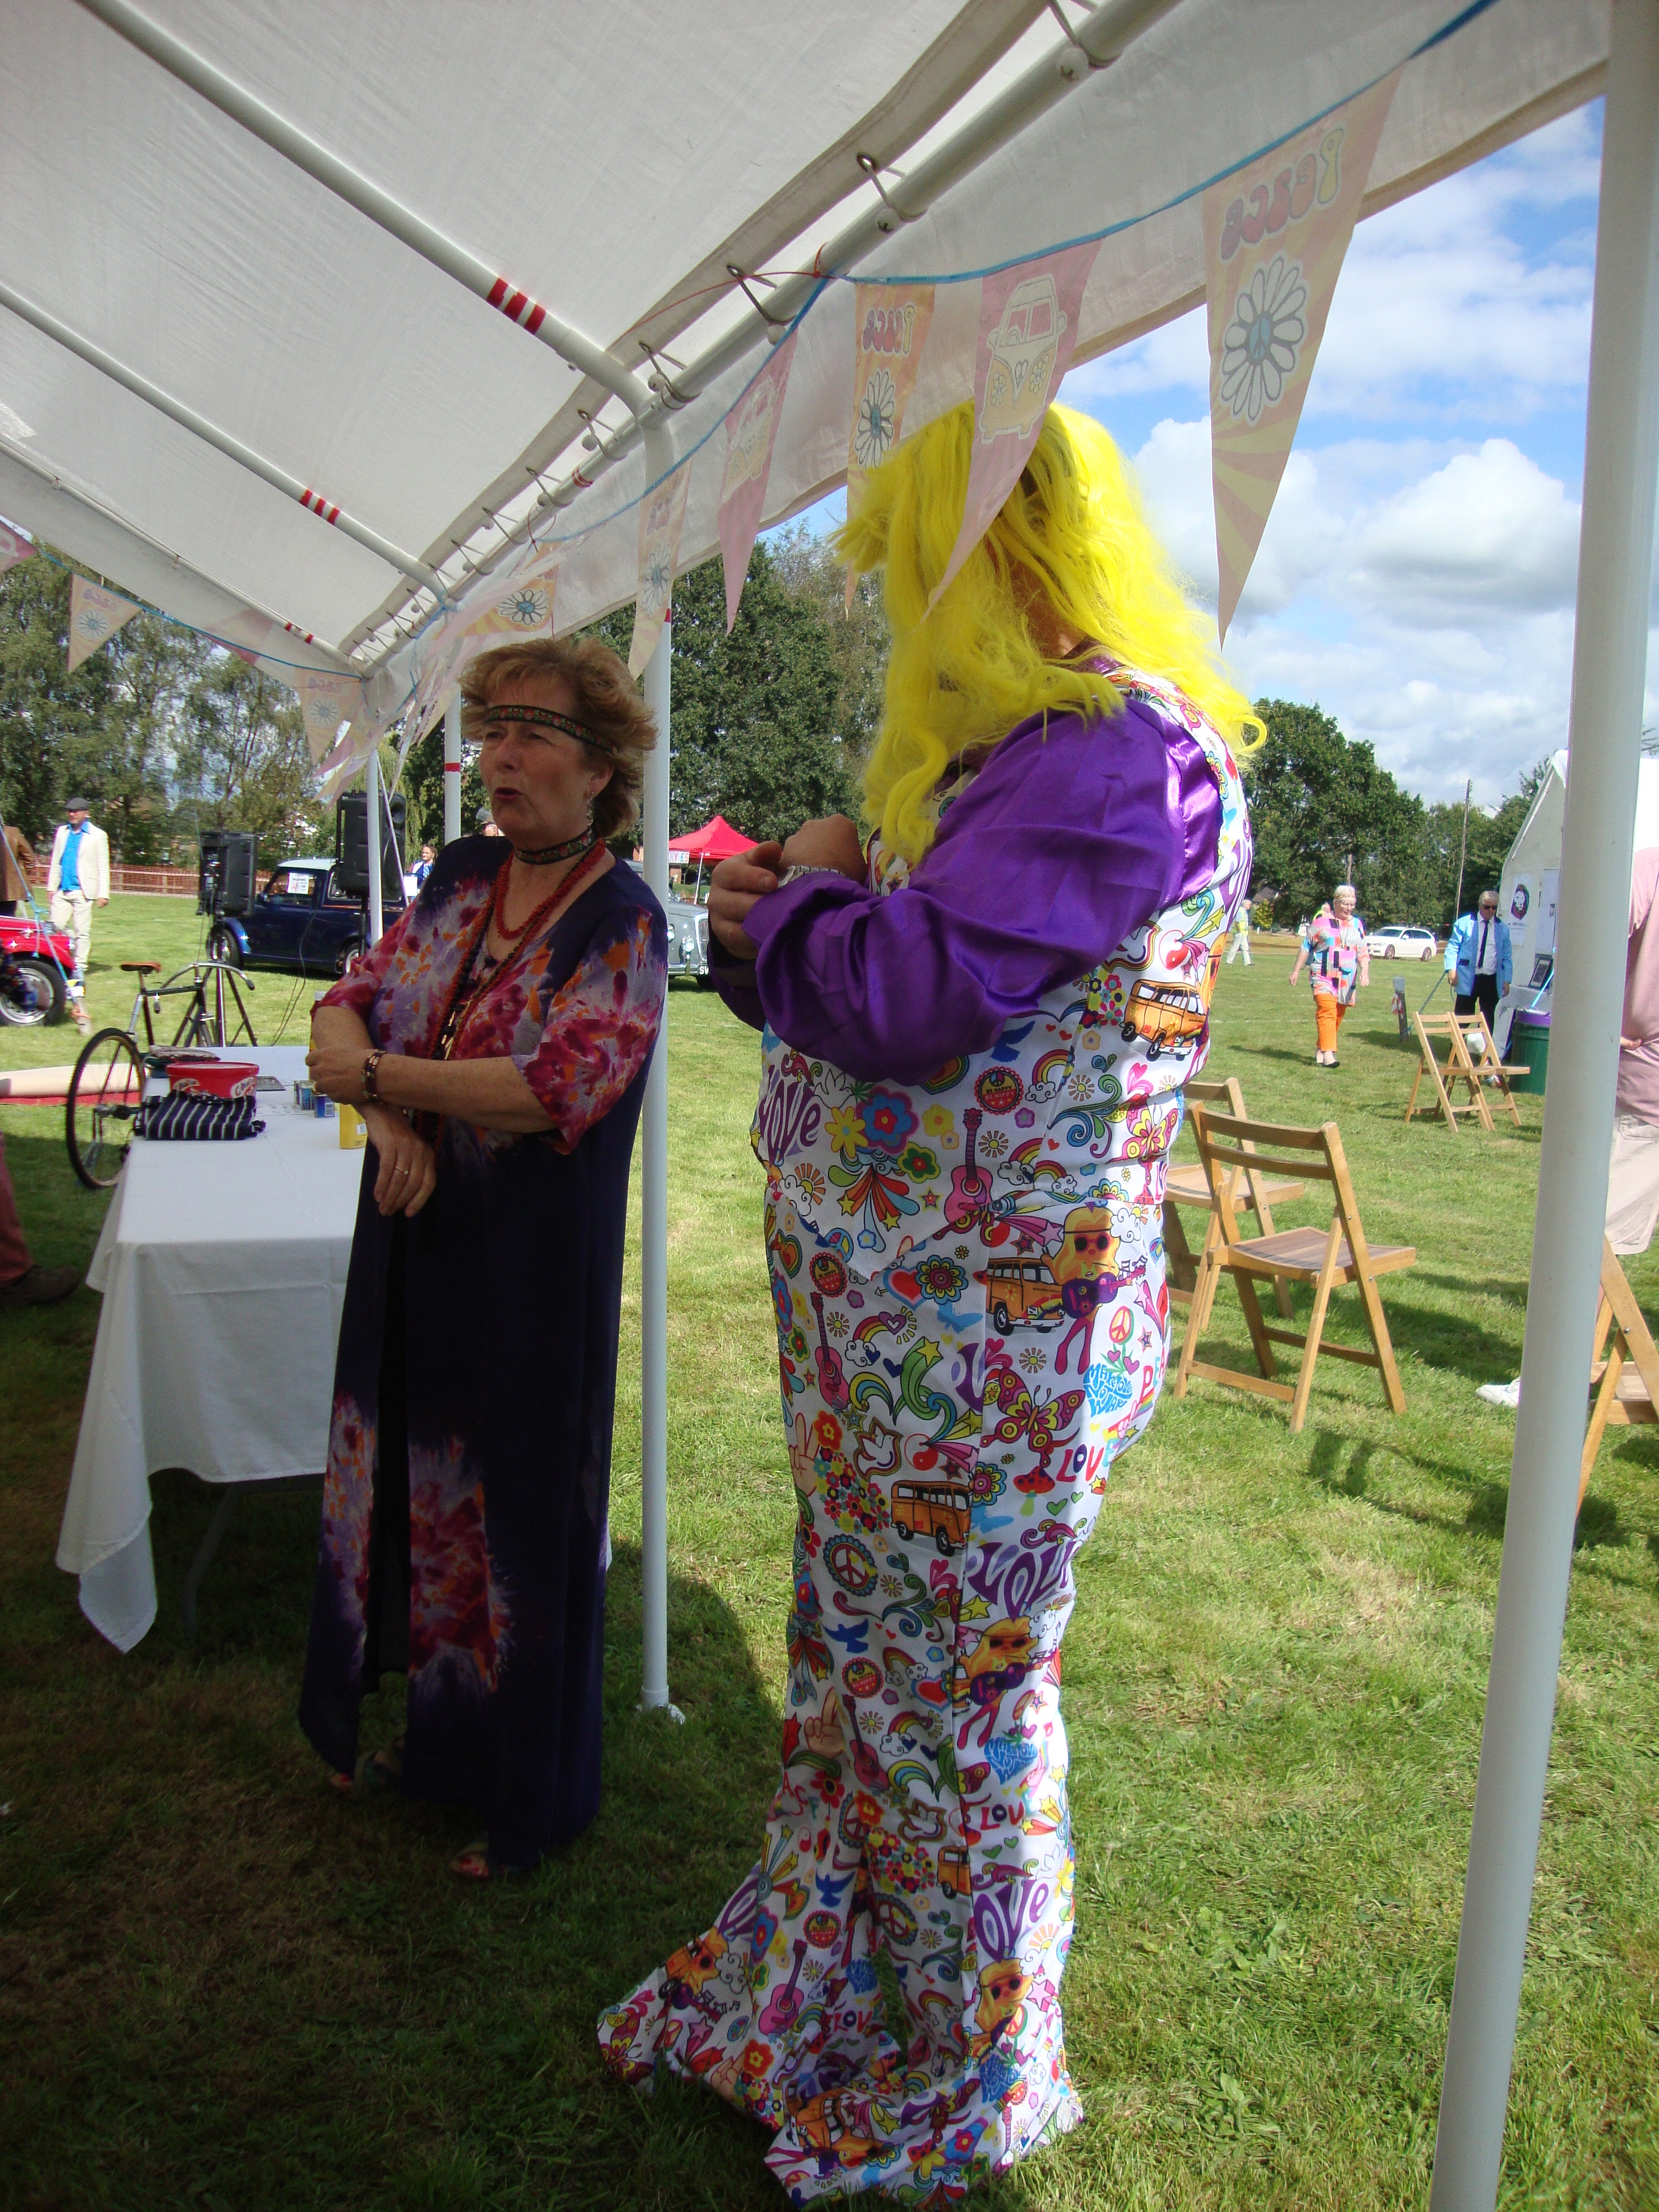 Photographs taken at the Groovin' on the Green event, September 2019